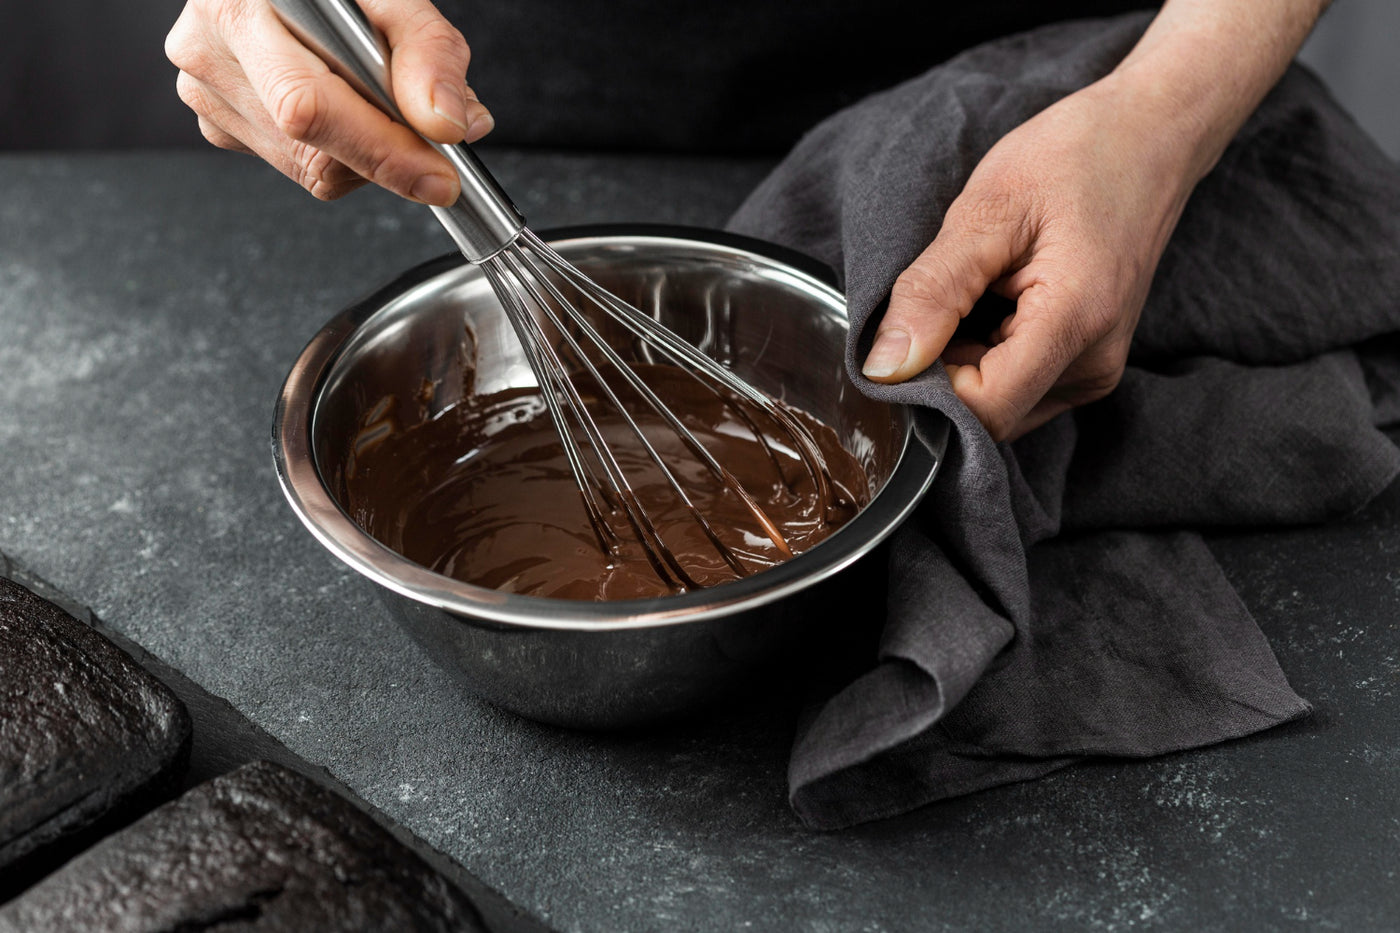 stefanelli's candies chocolate for baking person mixing melted chocolate with whisk